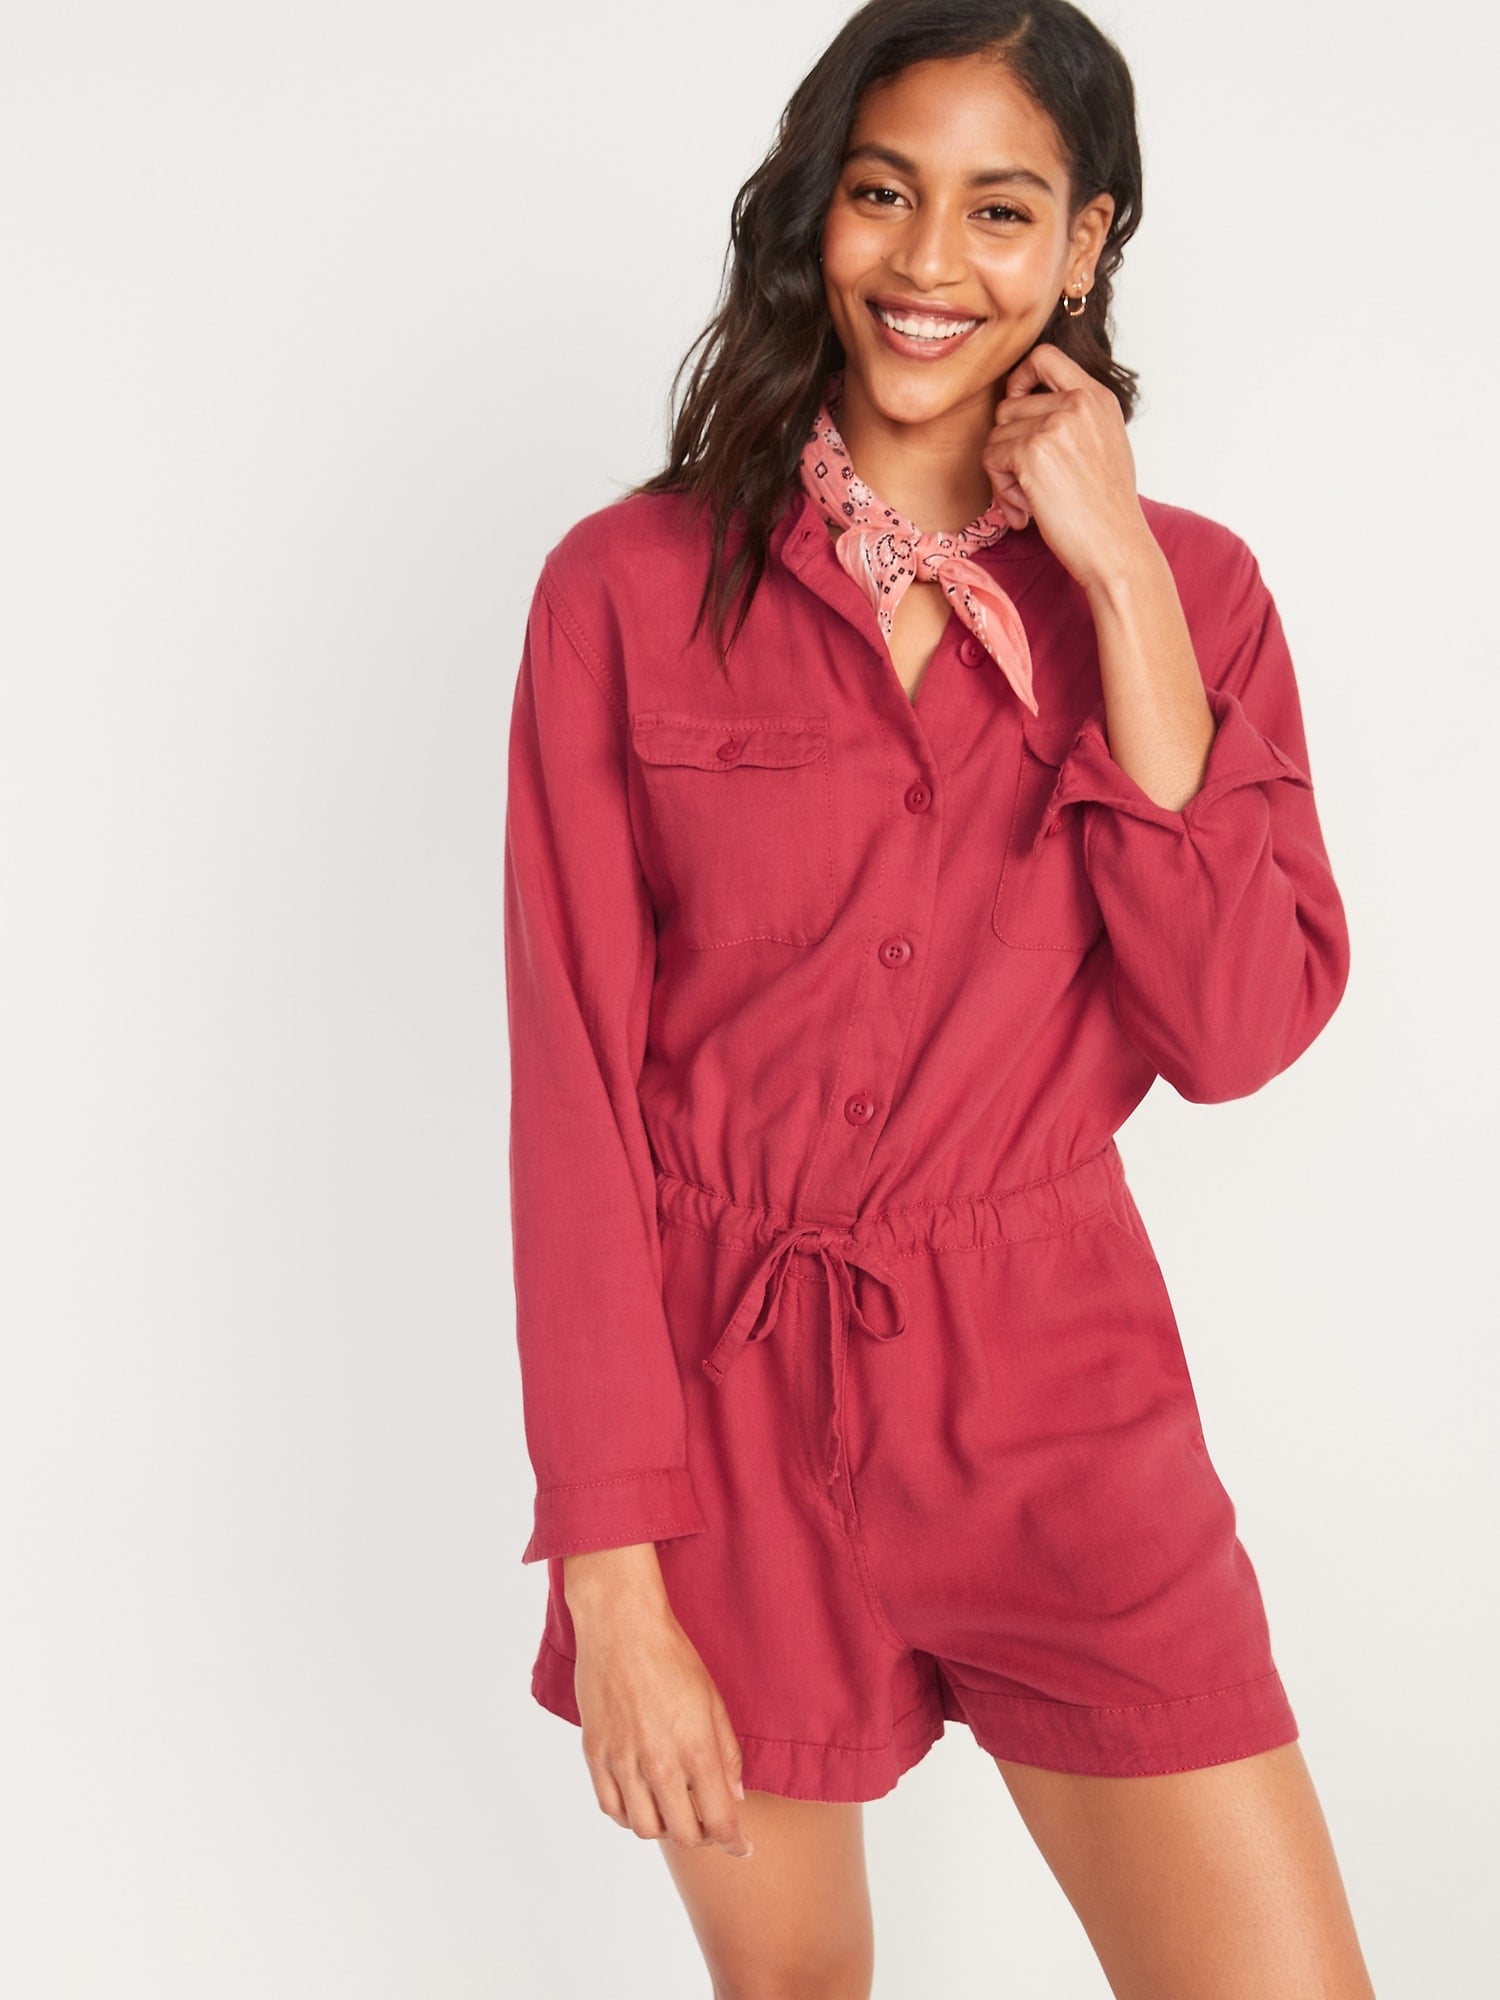 Old Navy Long-Sleeve Utility Romper | 18 Jumpsuits So Comfortable, You Could Probably Sleep in Them POPSUGAR Fashion Photo 11